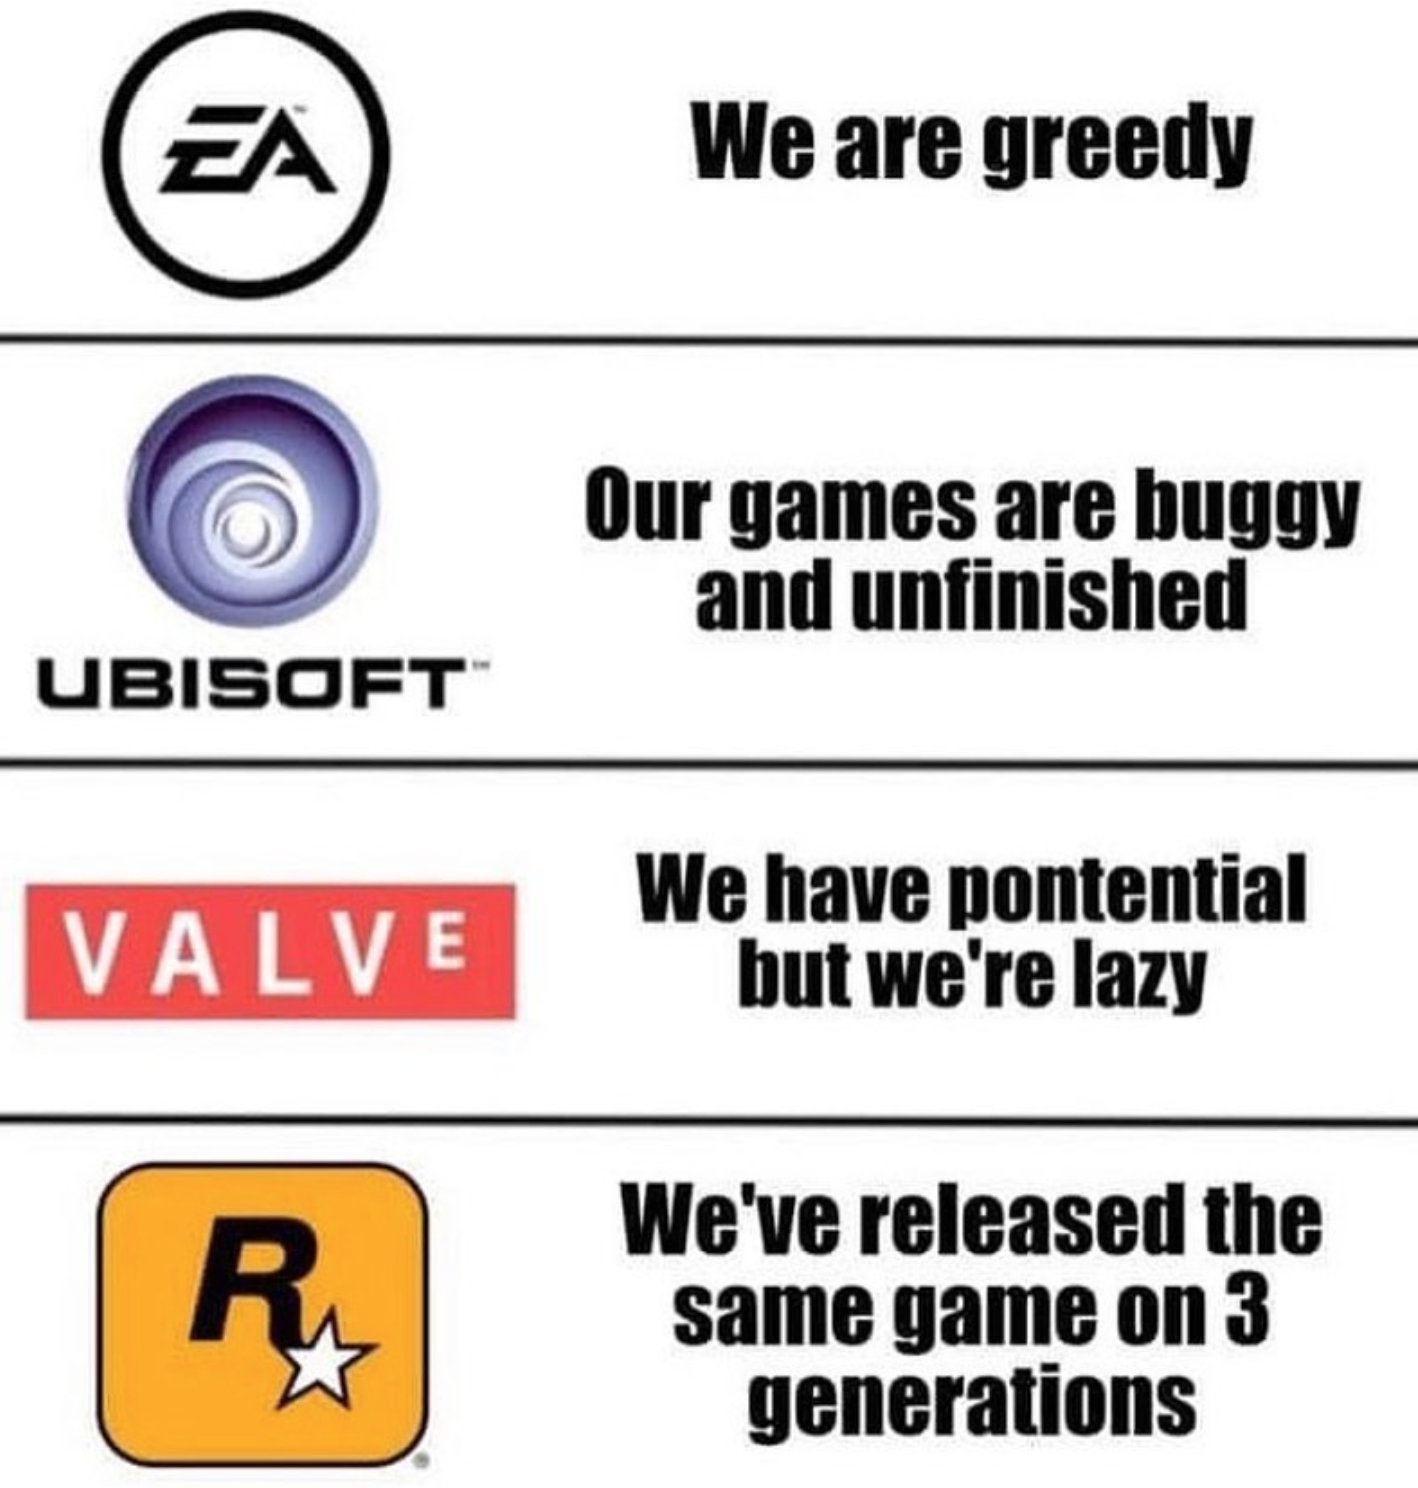 funny gaming memes - gta 5 - We are greedy Our games are buggy and unfinished Ubisoft Valve We have pontential but we're lazy R We've released the same game on 3 generations